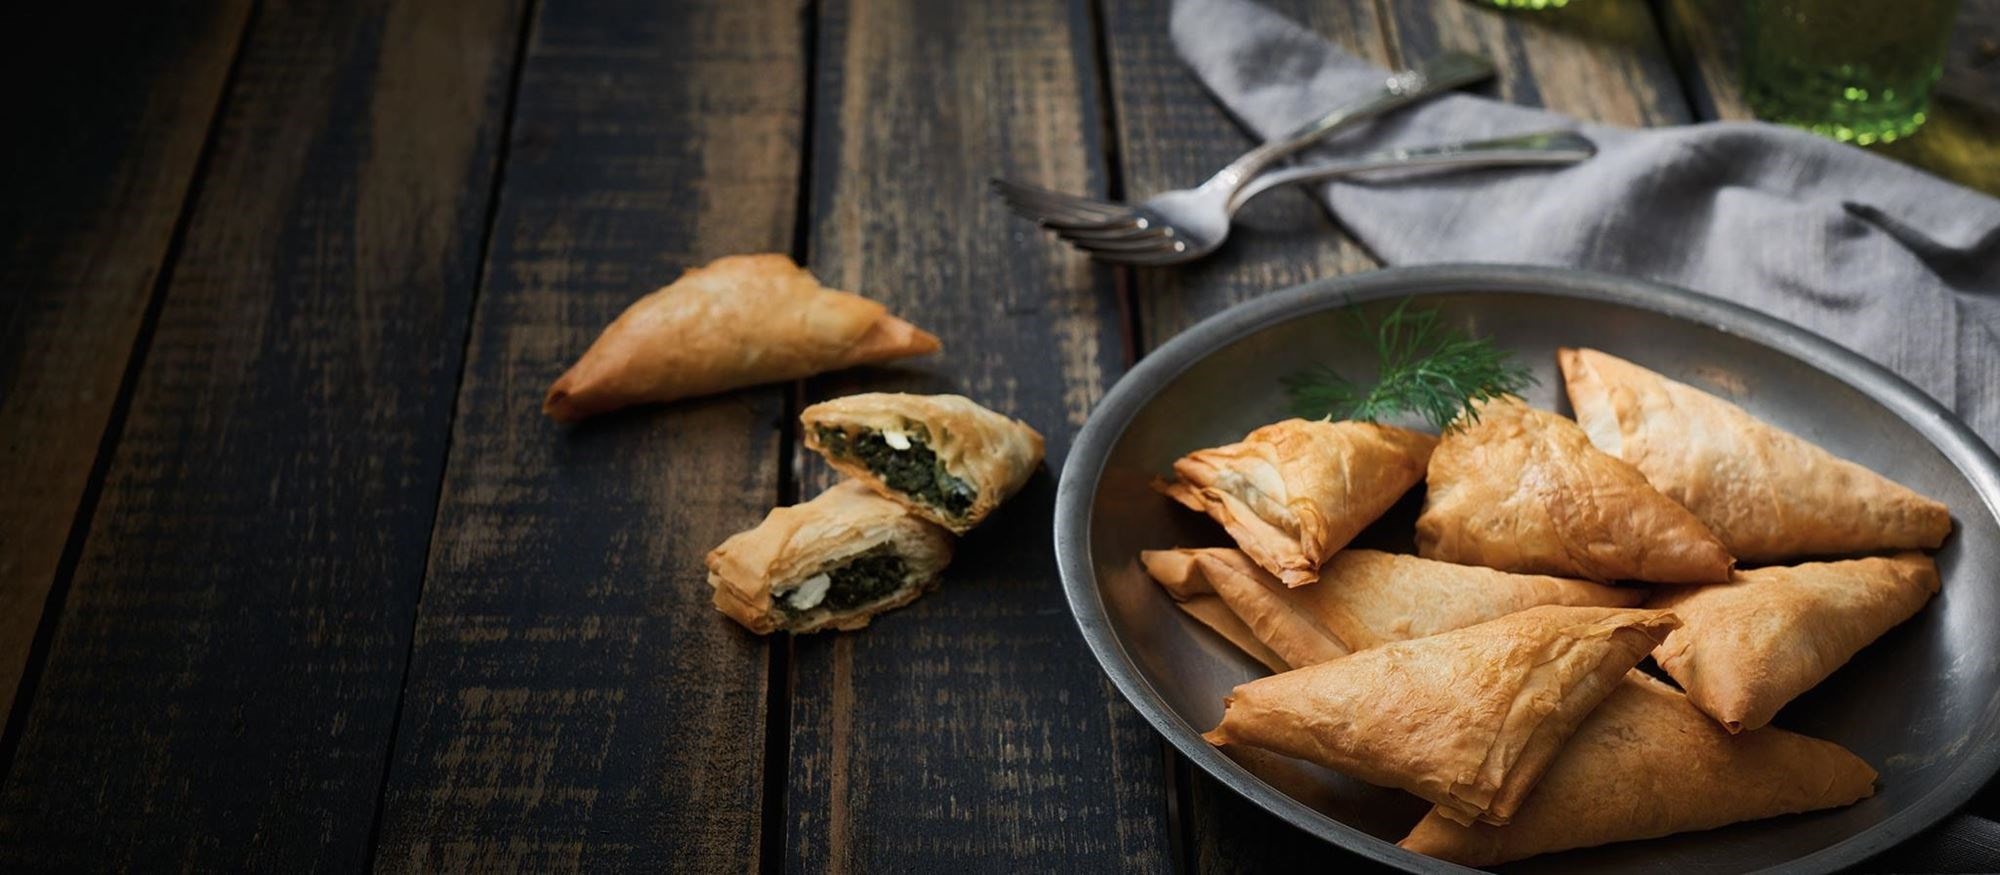 Easy and delicious spanakopita puffs recipe using the Steam Mode setting of your Wolf Convection Steam Oven